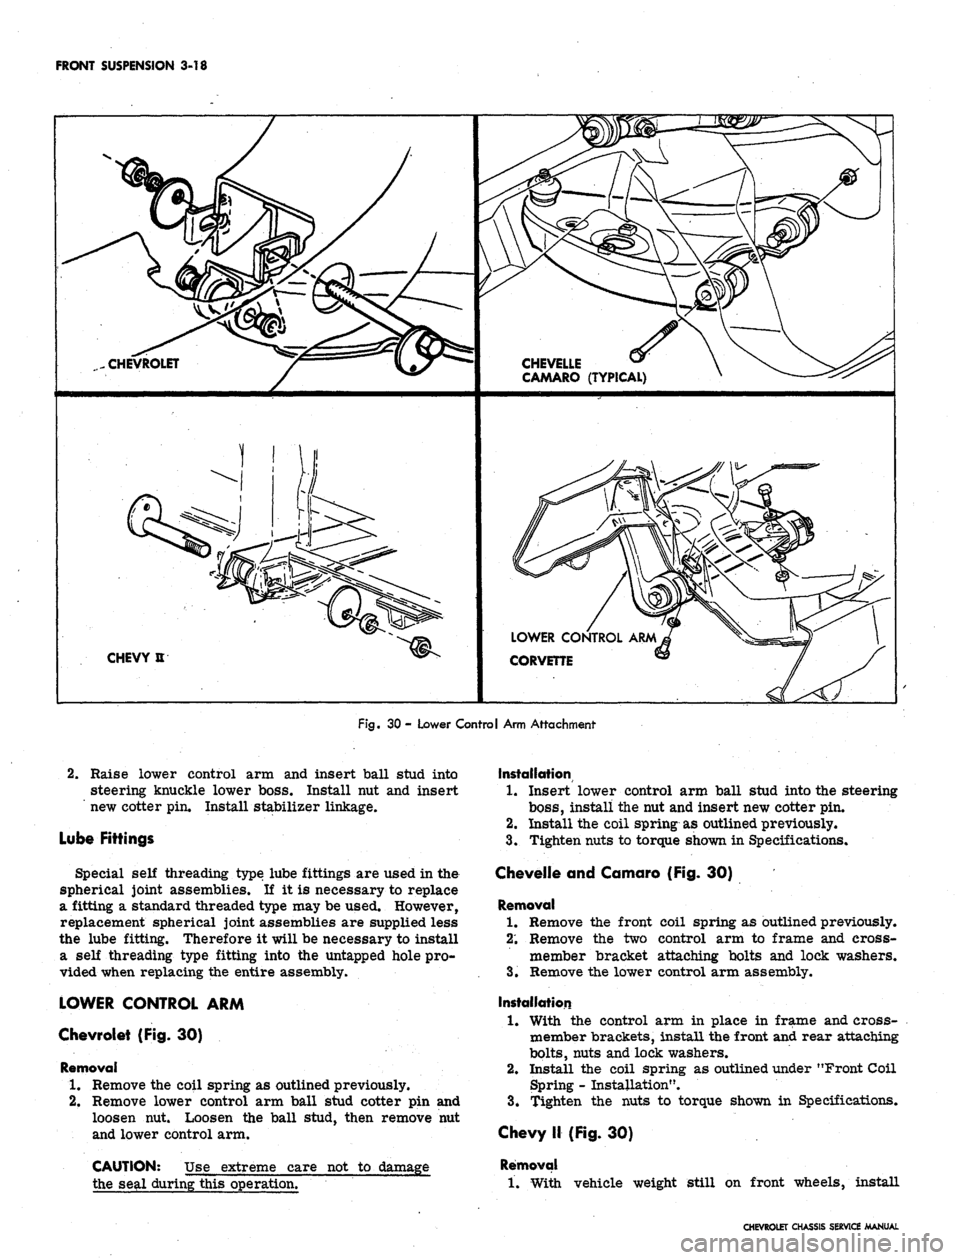 CHEVROLET CAMARO 1967 1.G Chassis Workshop Manual 
FRONT SUSPENSION 3-18

CHEVROLET 
CHEVELLE

CAMARO (TYPICAL)

CHEVY U 
LOWER CONTROL ARM

CORVETTE

Fig.
 30 - Lower Control Arm Attachment

2.
 Raise lower control arm and insert ball stud into

ste